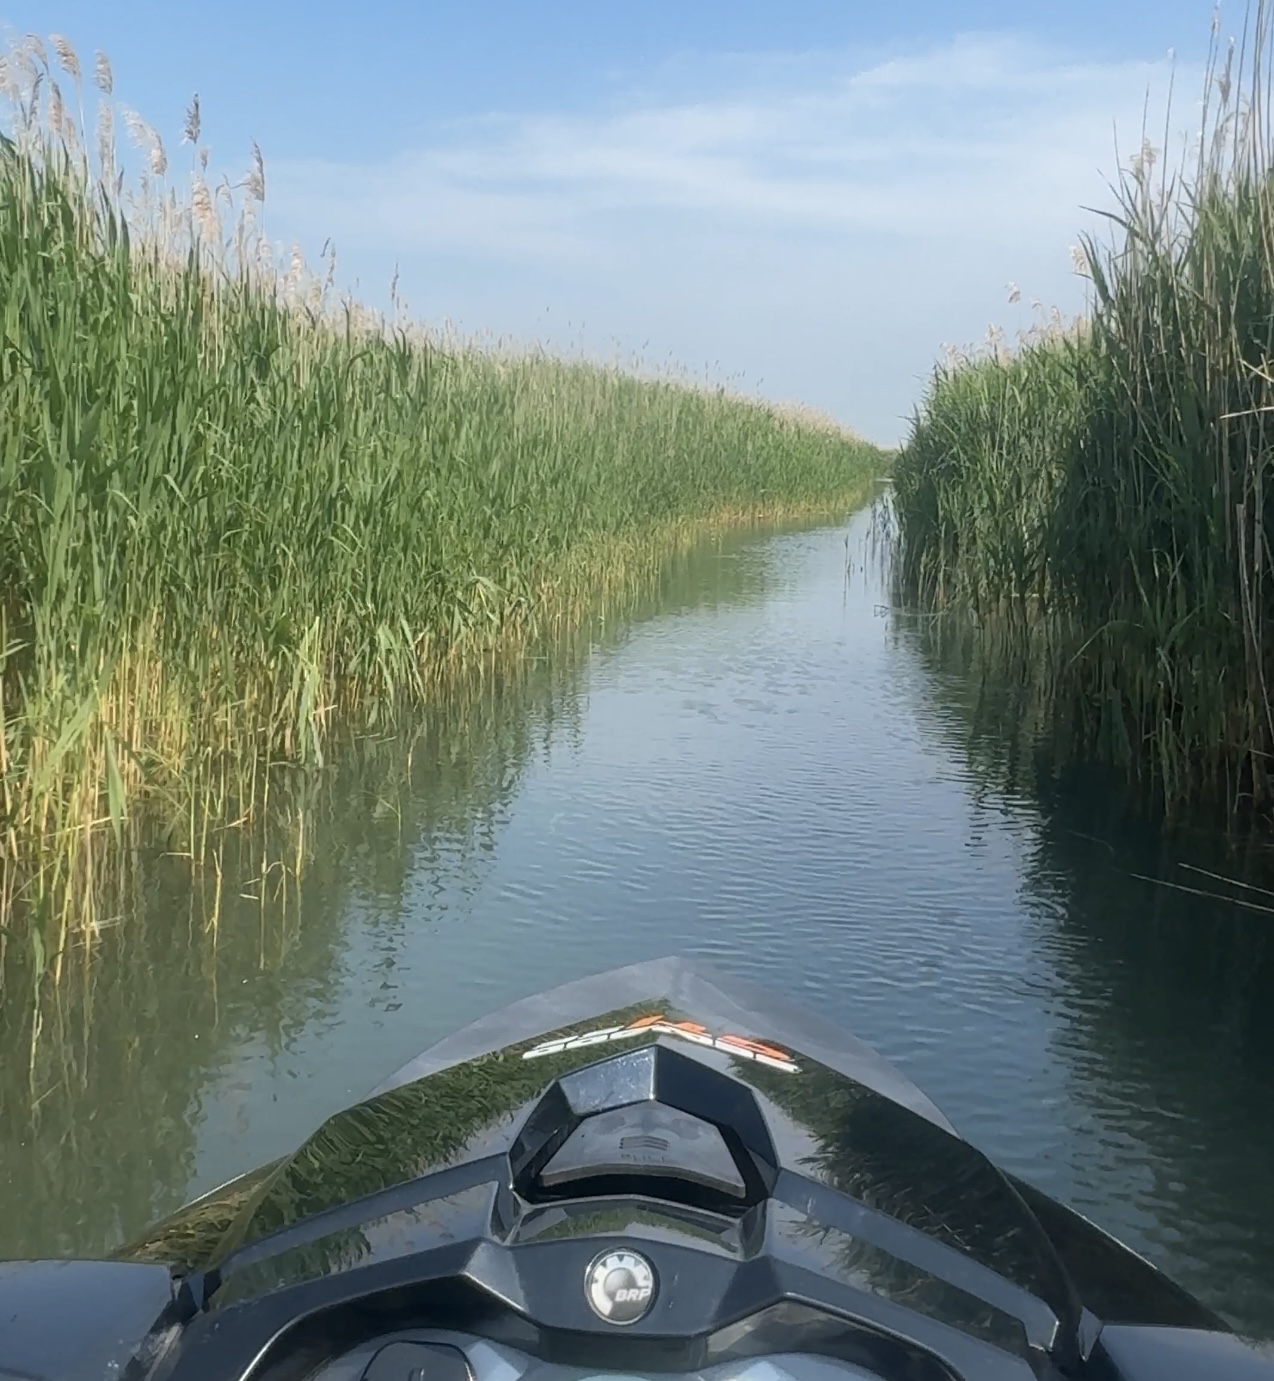 Jet skiing through the marshes in the St. Clair Flats